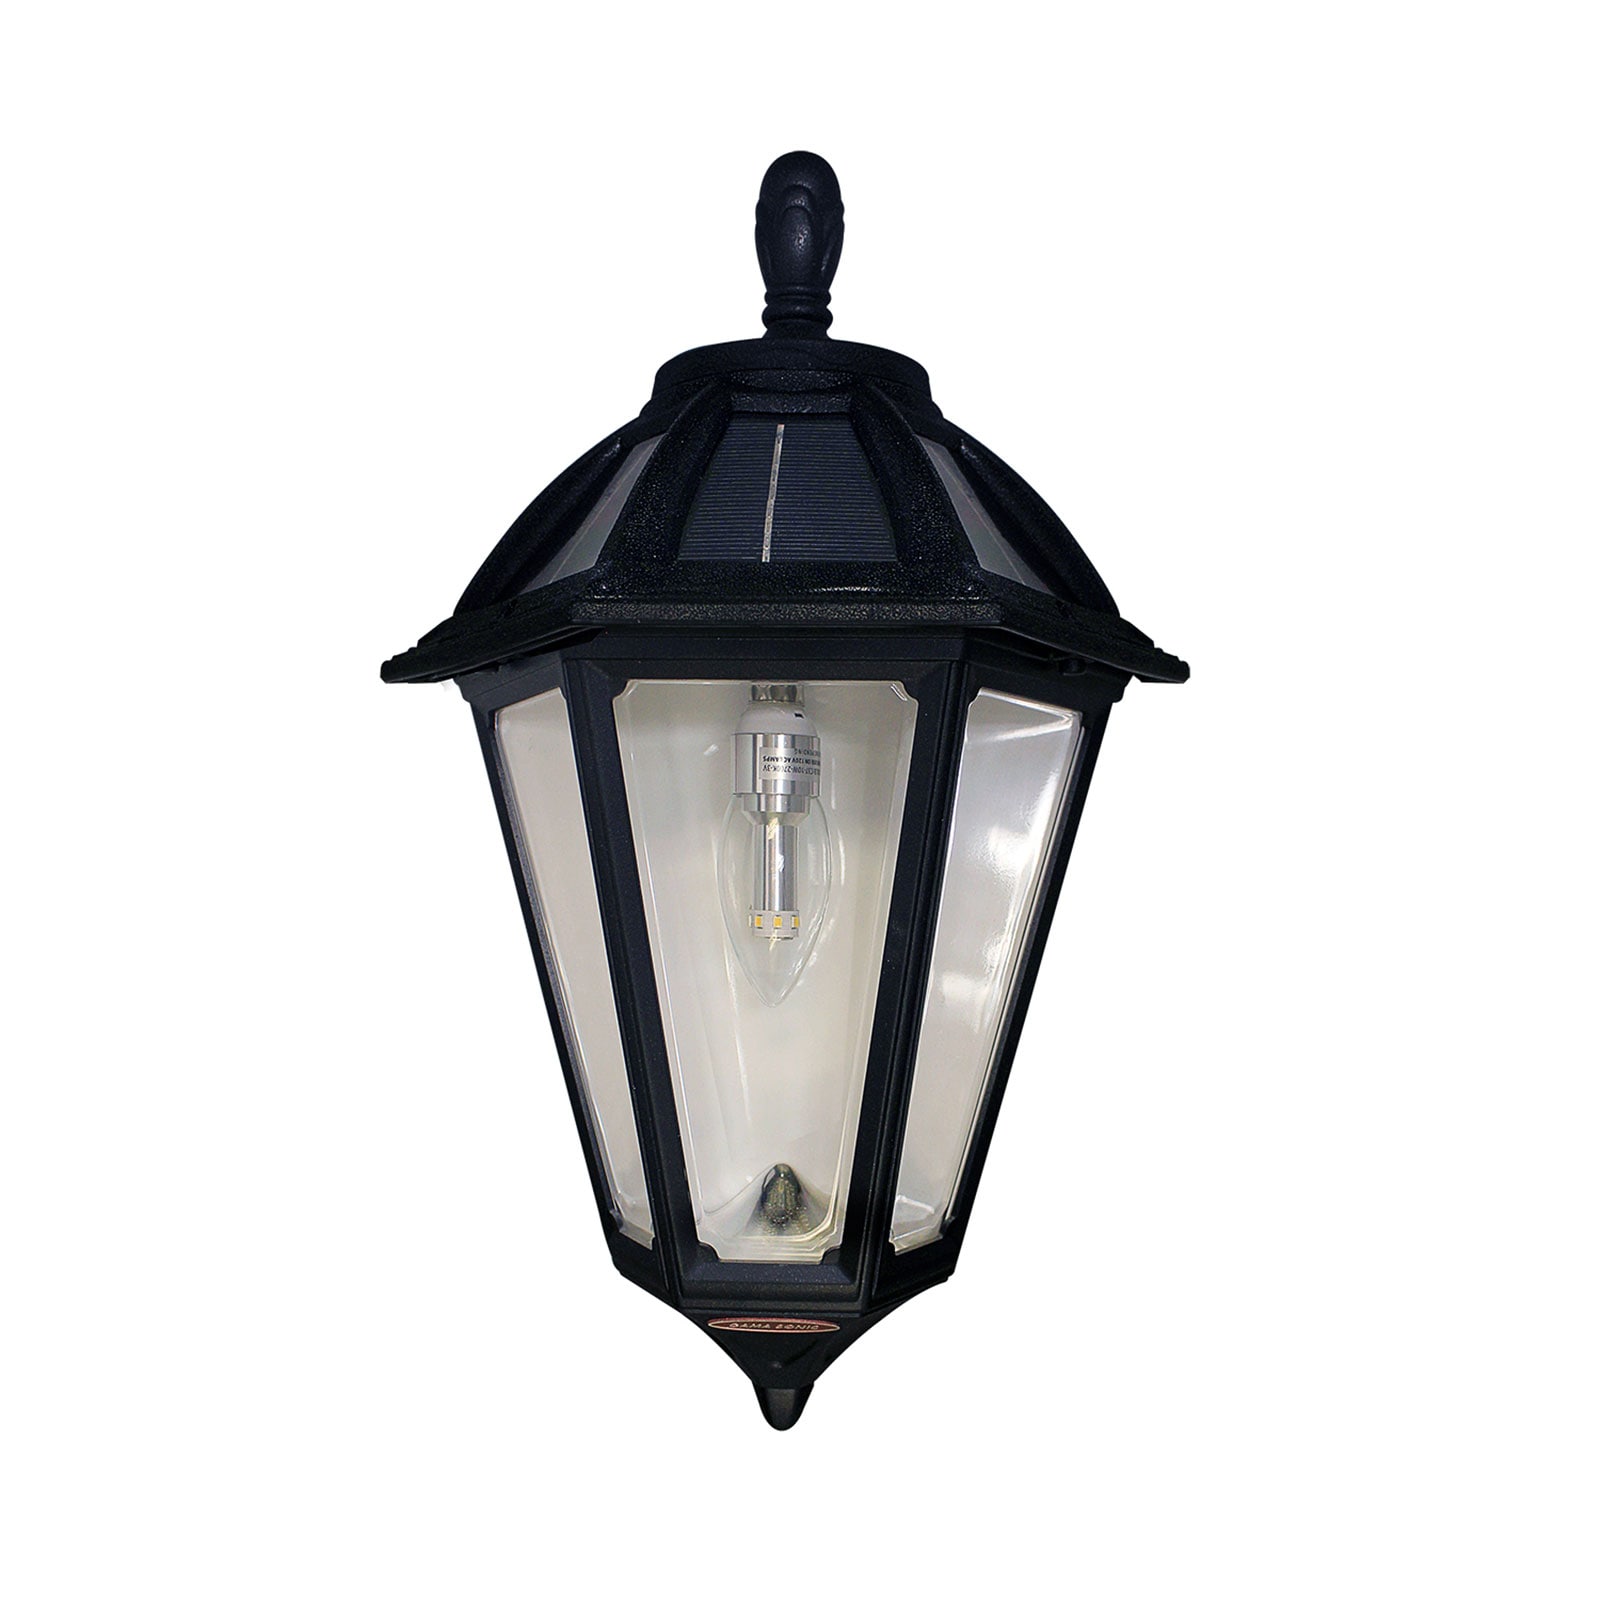 Gama Sonic Polaris Solar Sconce 17 5 In, Black Solar Led Outdoor Wall Lantern Sconce 2 Package